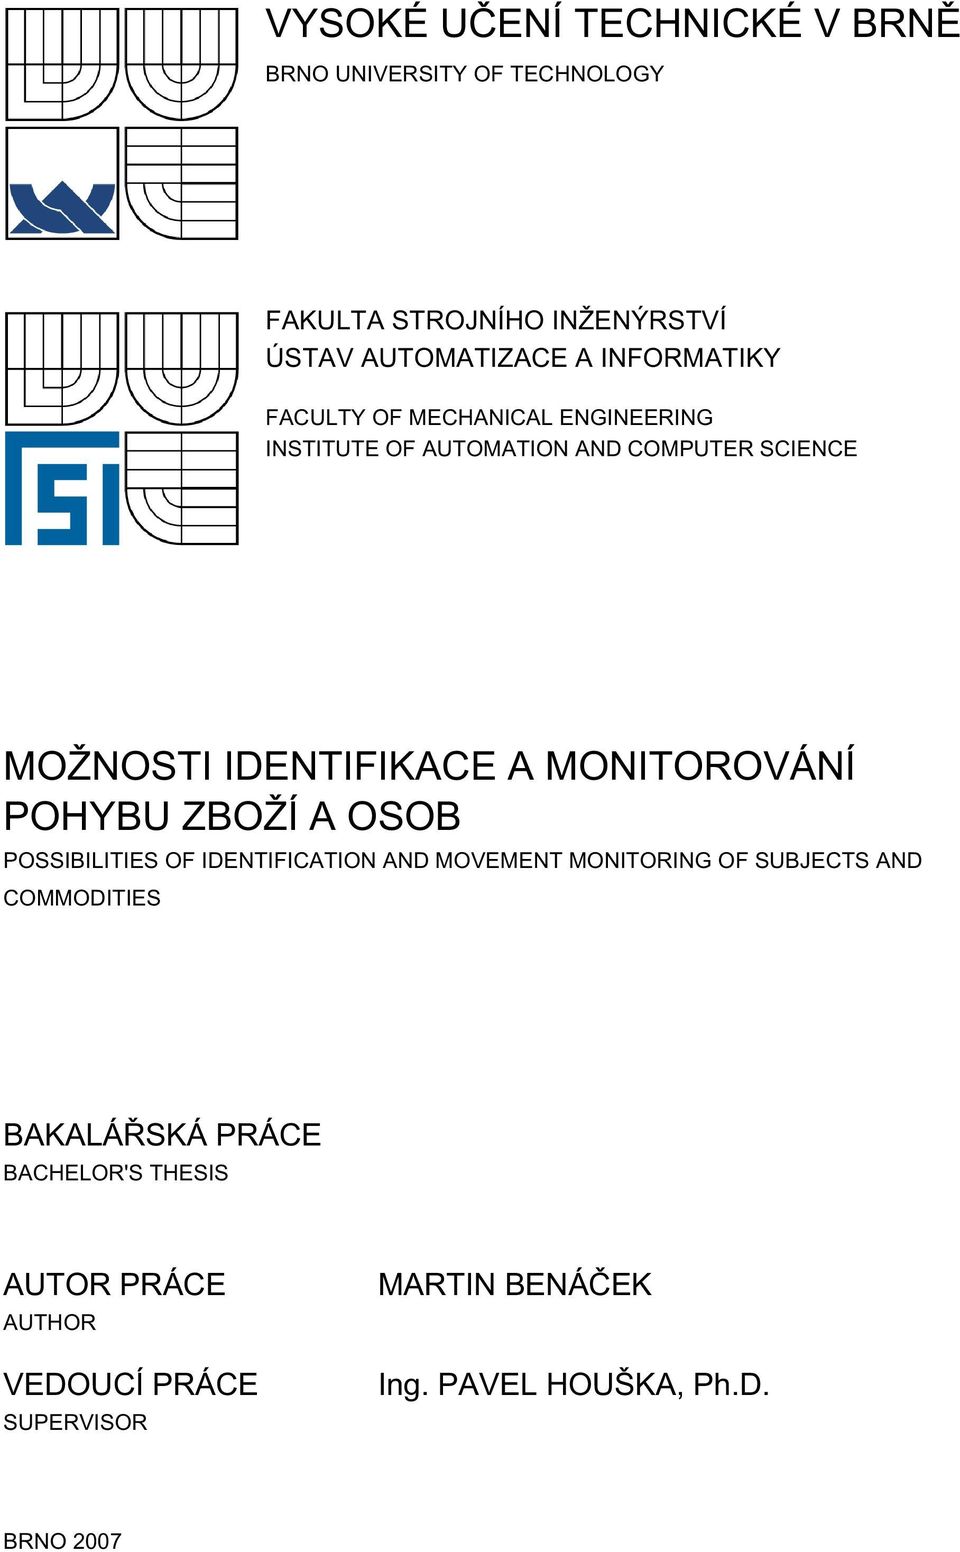 MONITOROVÁNÍ POHYBU ZBOŽÍ A OSOB POSSIBILITIES OF IDENTIFICATION AND MOVEMENT MONITORING OF SUBJECTS AND COMMODITIES